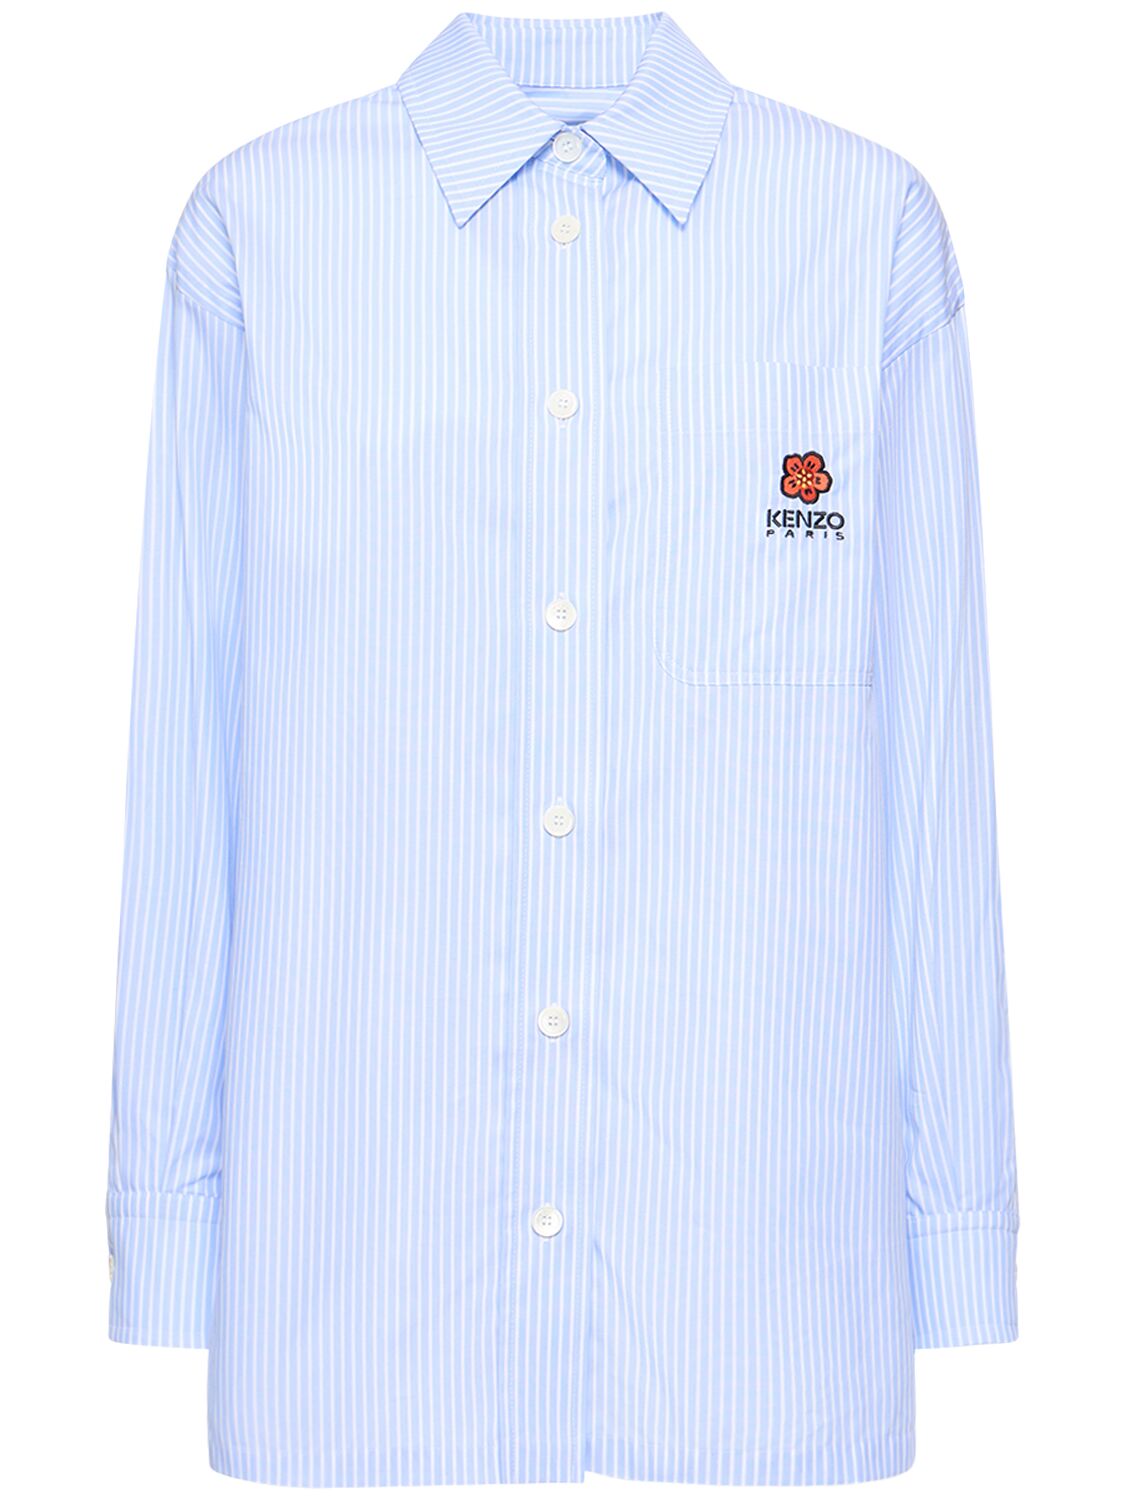 Image of Crest Oversize Striped Cotton Shirt